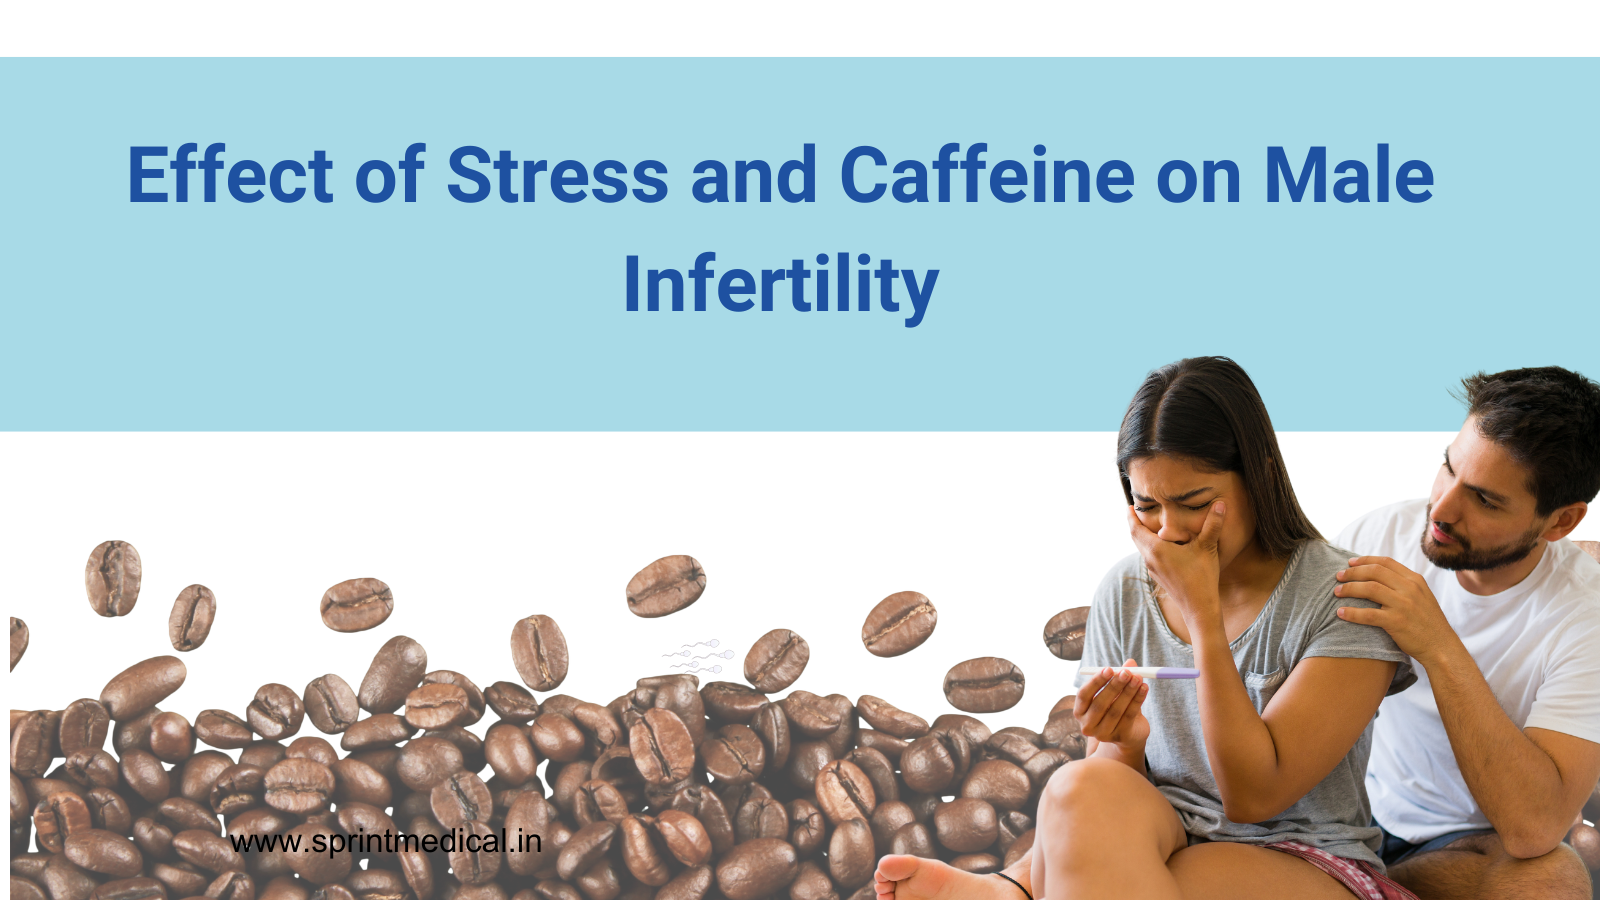 Effect of Stress and Caffeine on Male Infertility